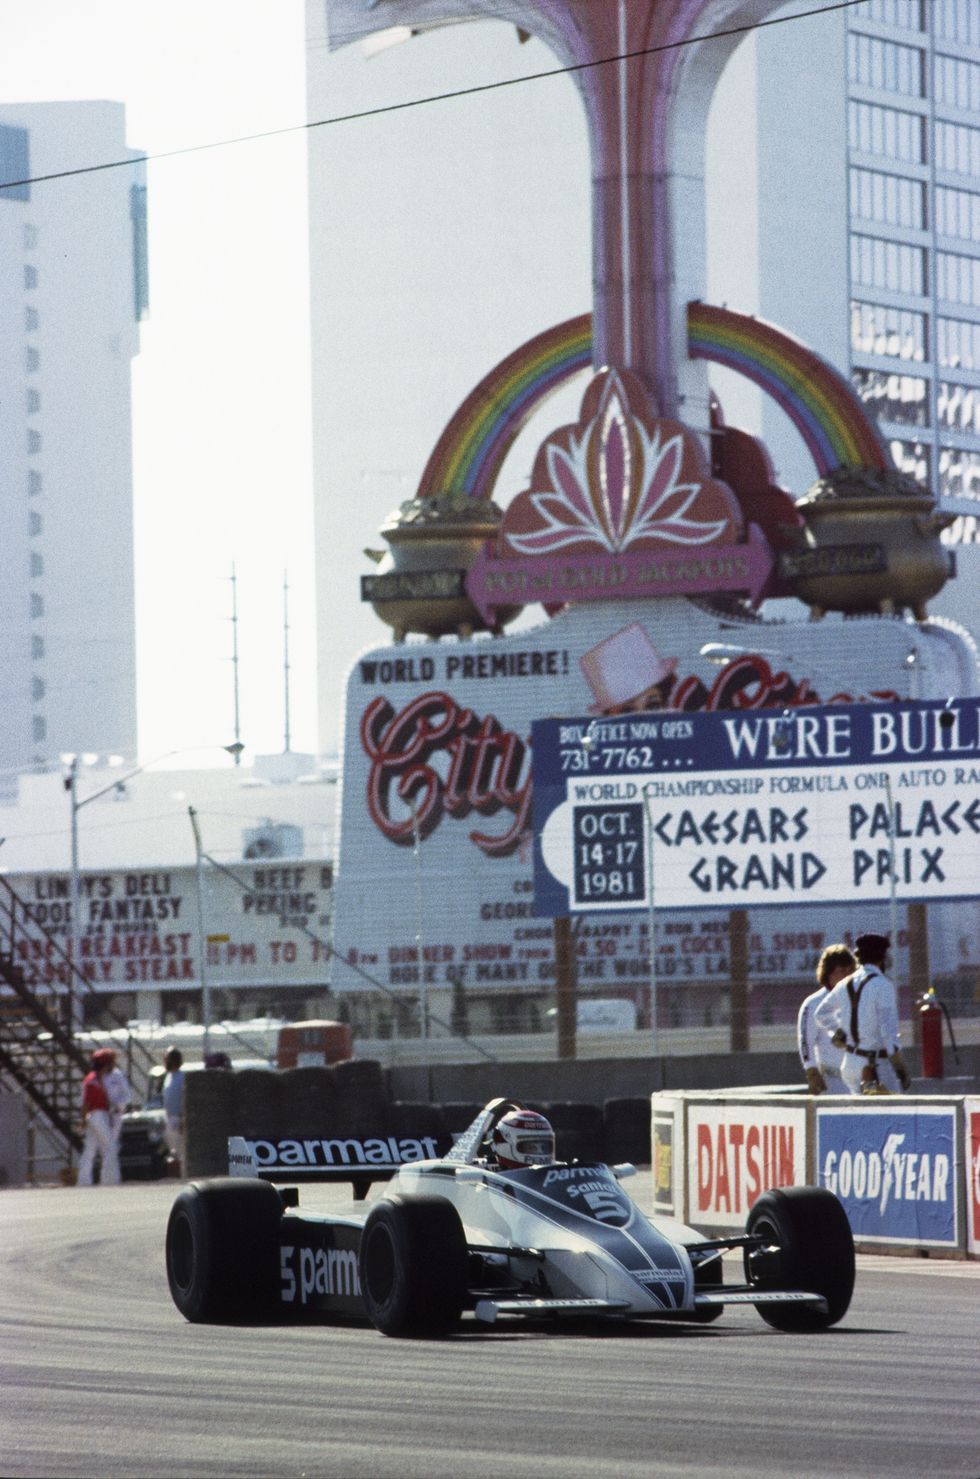 caesar's palace, las vegas, nevada, usa 15 17 october 1981 nelson piquet brabham bt49c ford cosworth, 5th position to clinch the world championship ref 81lv16 world copyright lat photographic